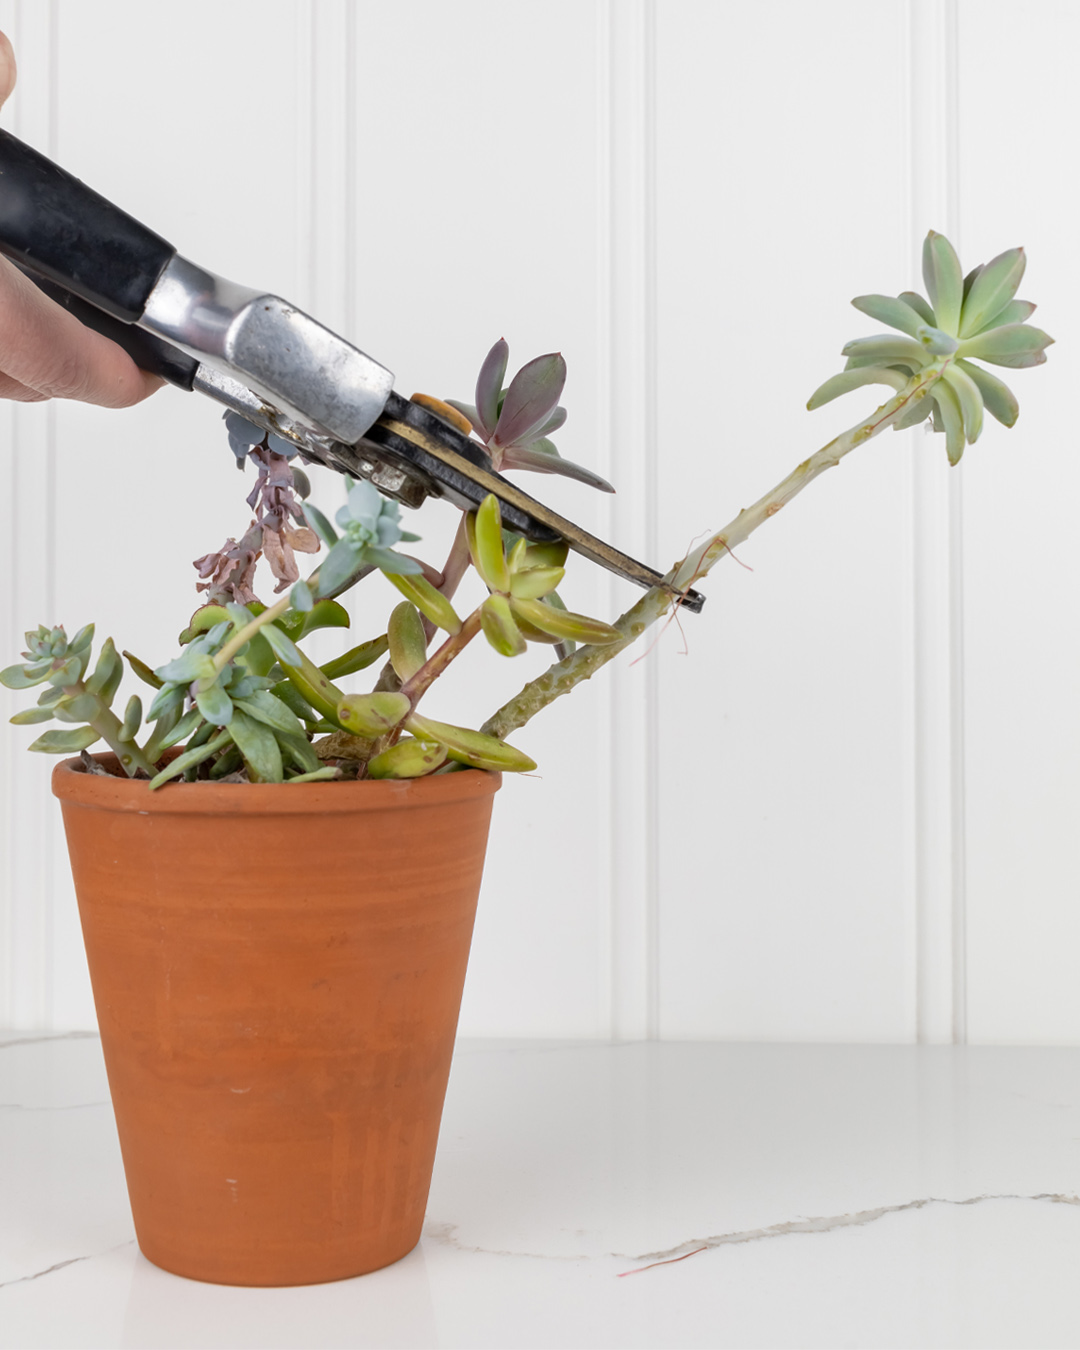 In today's post I'll share how to fix stretched succulents if your favourite succulents have started to look a little bit leggy and stretched out.